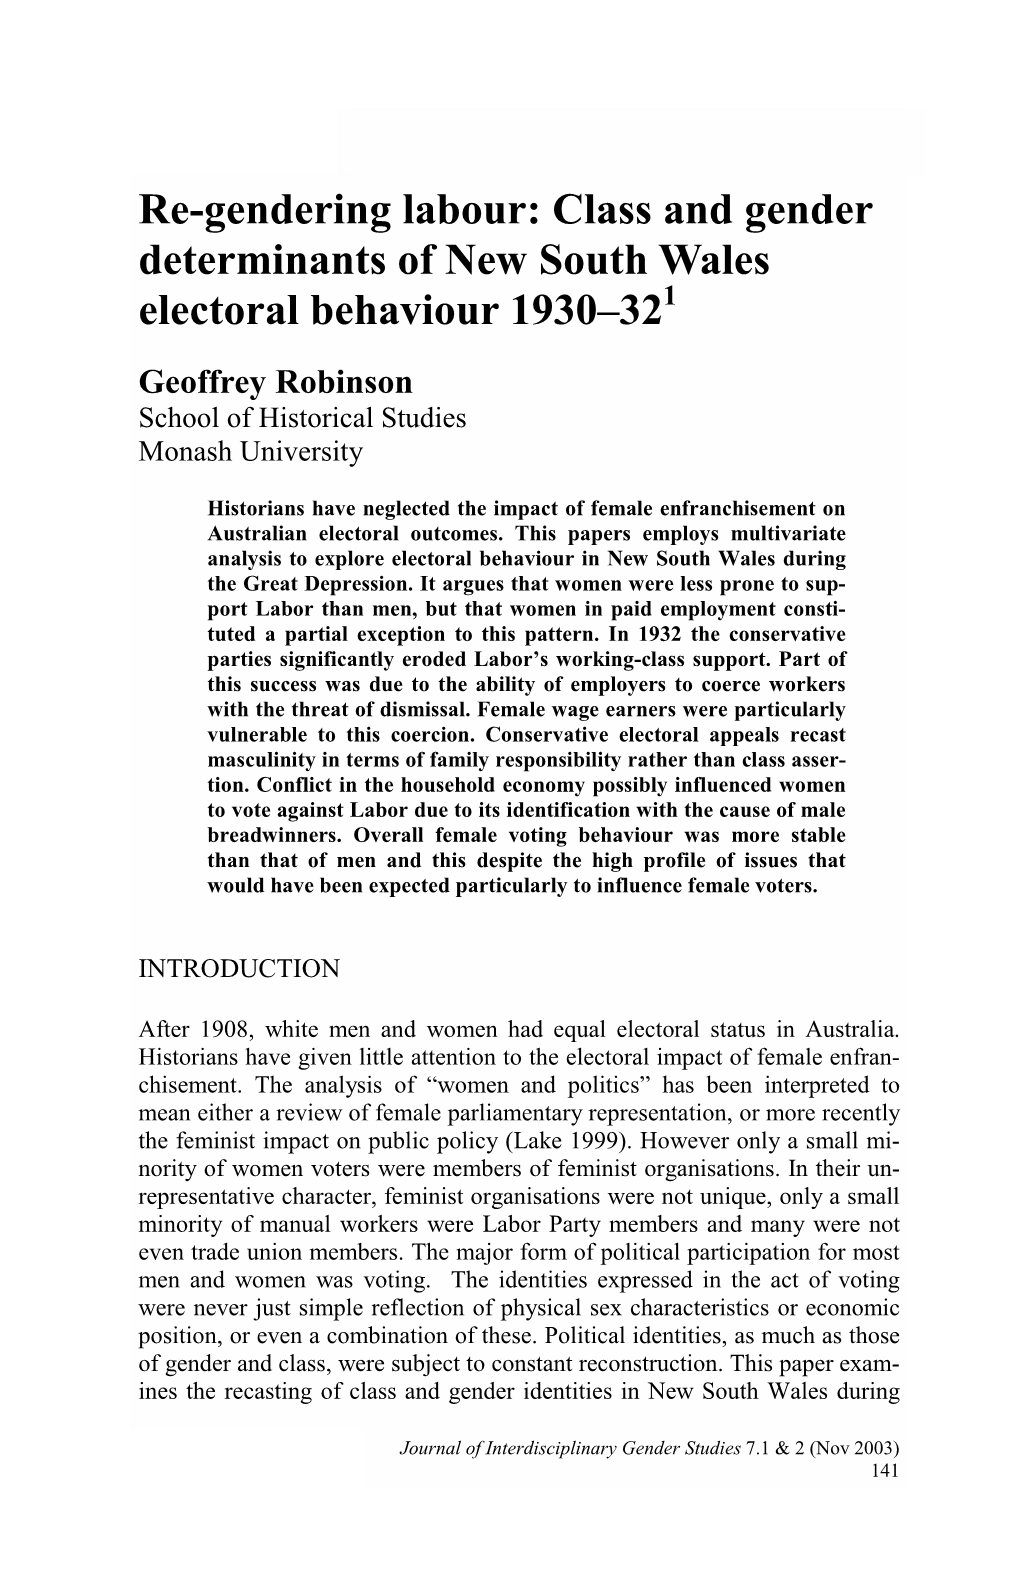 Class and Gender Determinants of New South Wales Electoral Behaviour 1930–321